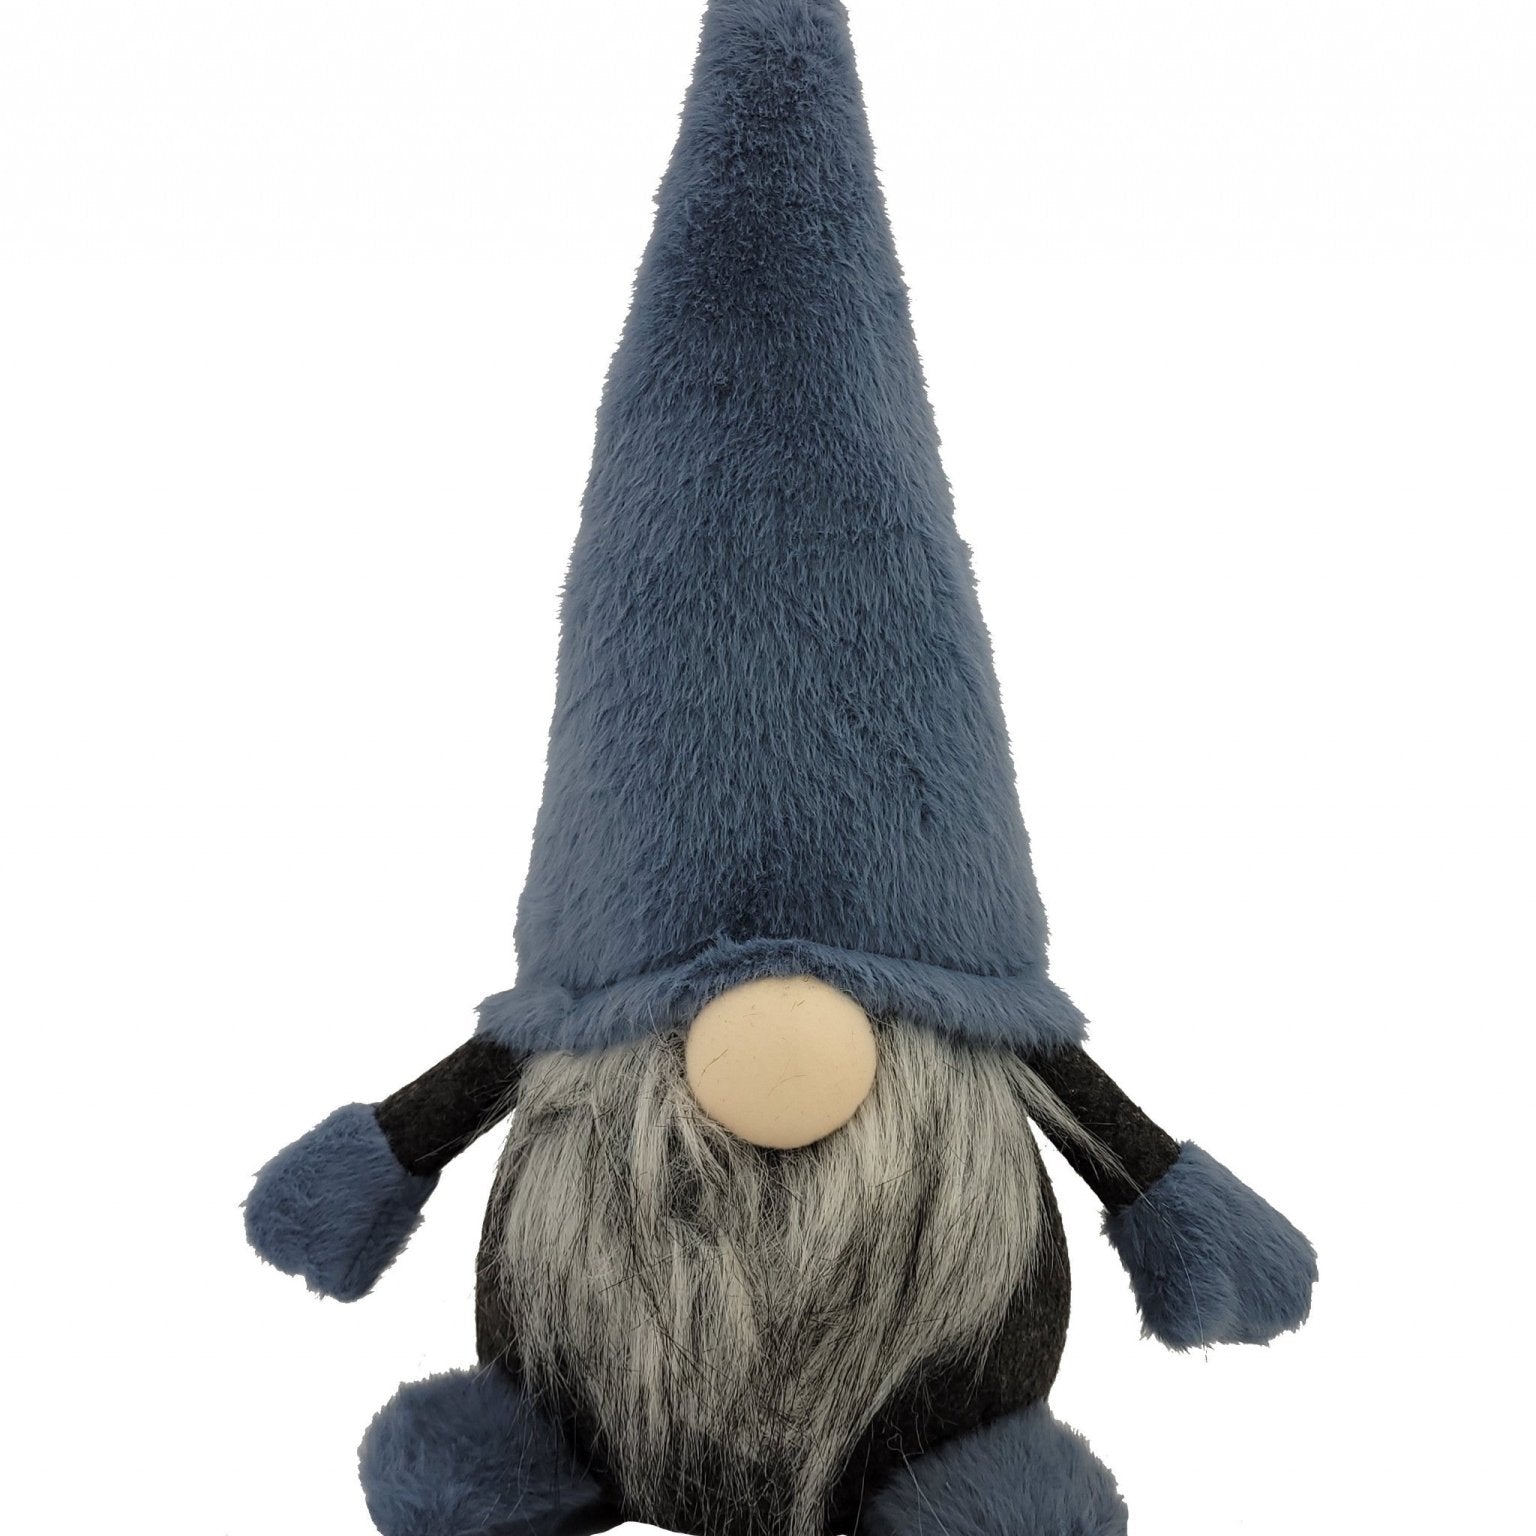 18" Slate Blue And Gray Fabric Standing Gnome Sculpture - Tuesday Morning-Sculptures